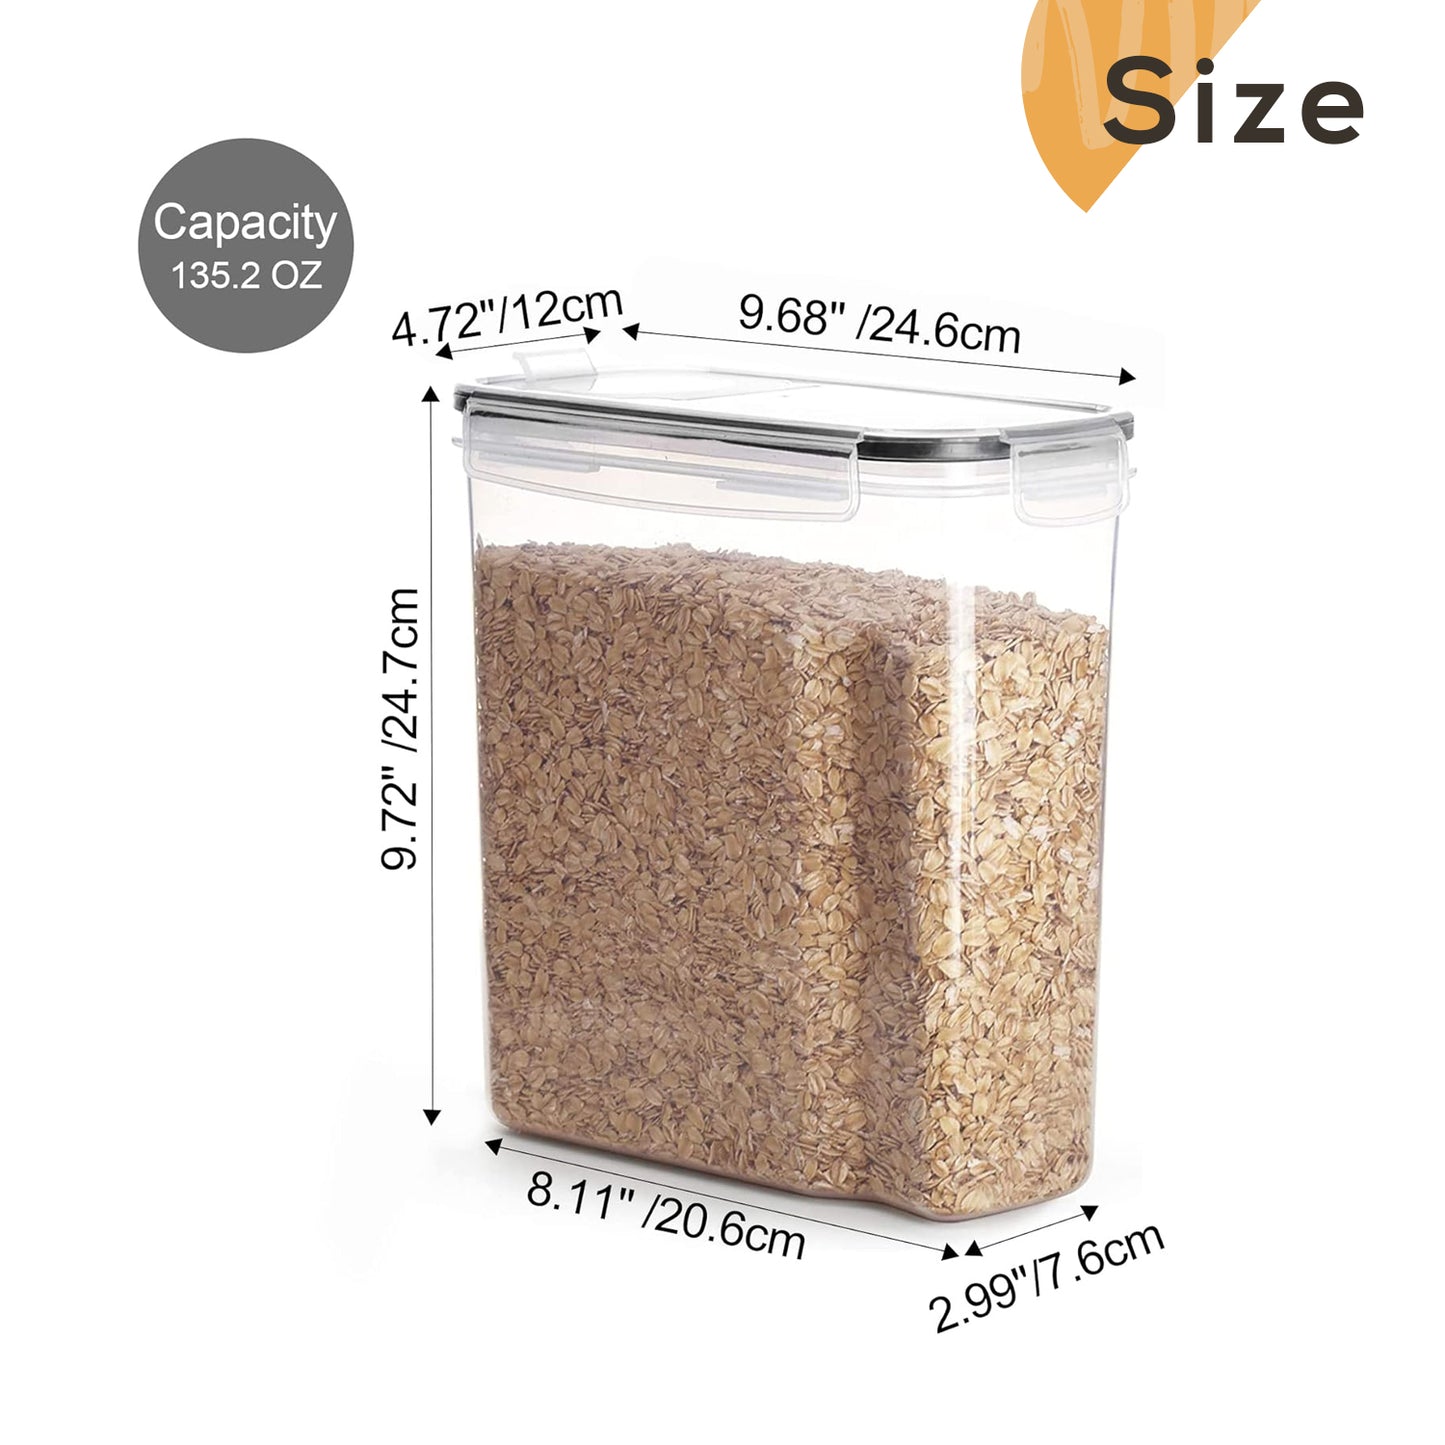 4PCS 4L Cereal Containers Airtight Food Storage for Kitchen and Pantry Organization Canisters for, Dry Pet Food, Flour, Sugar, Rice, Nuts, Snacks & More